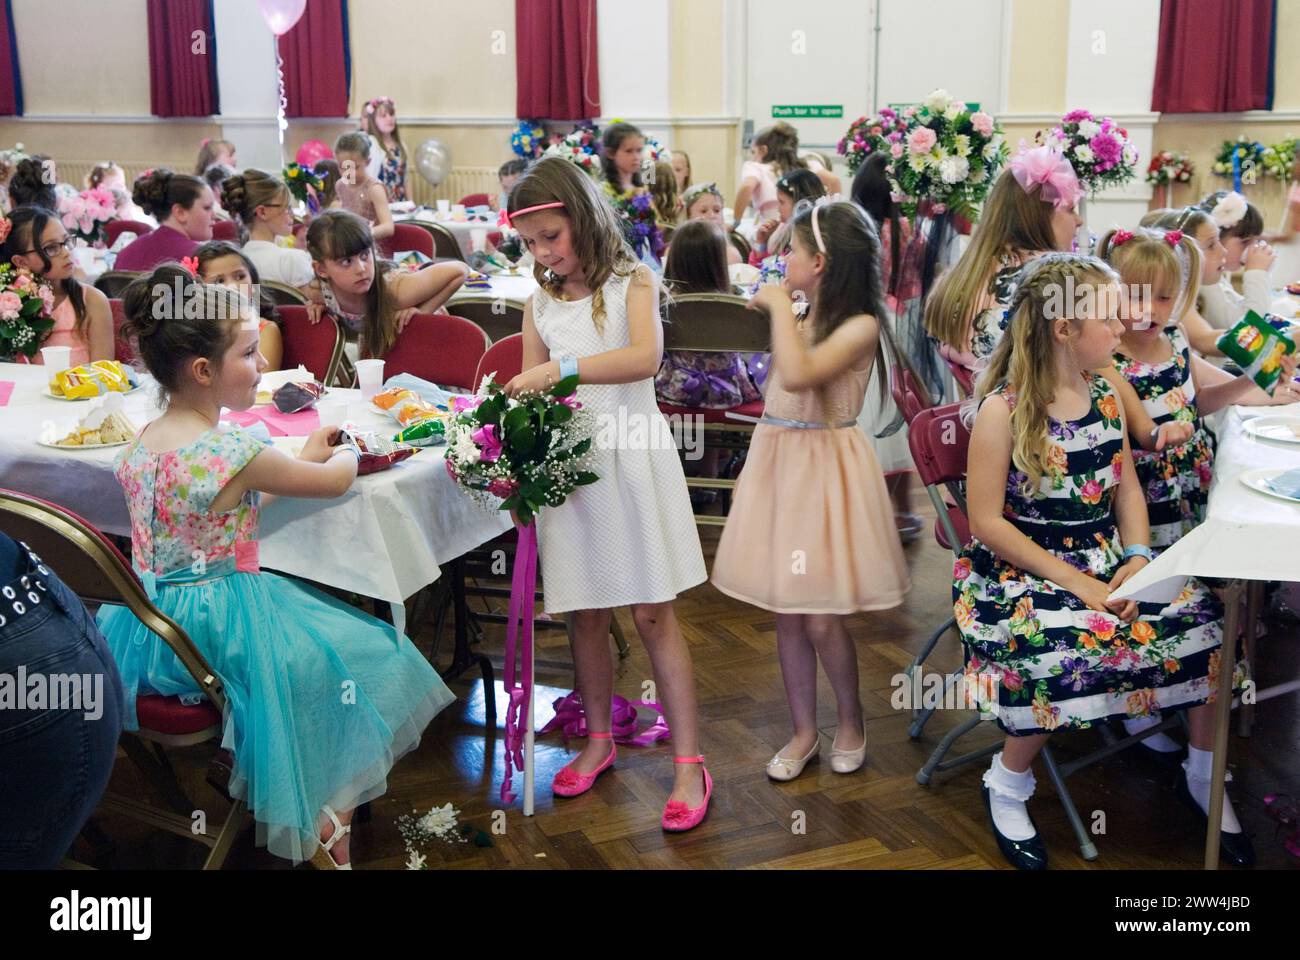 Neston Female Friendly Society Annual Club Walking Day. Neston Cheshire UK 2015. Girls aged 5-15 yrs of age can walk and then become members. Tea in the Civic Hall at the end of the day. Stock Photo